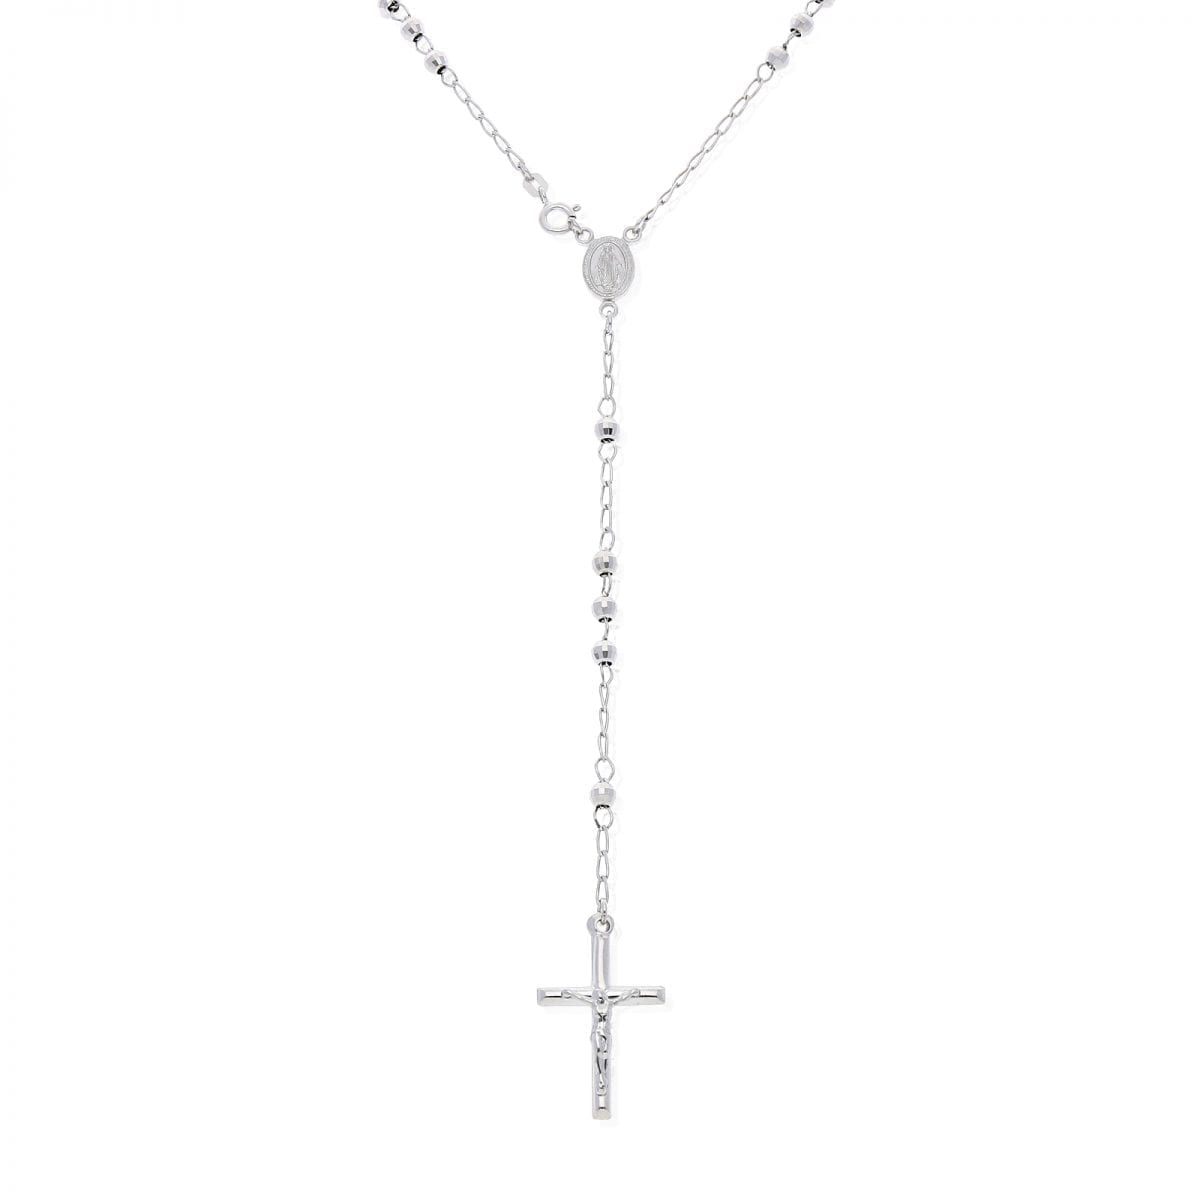 925 Sterling Silver 4mm Diamond Cut Rosary Cross Chain Necklace 26"